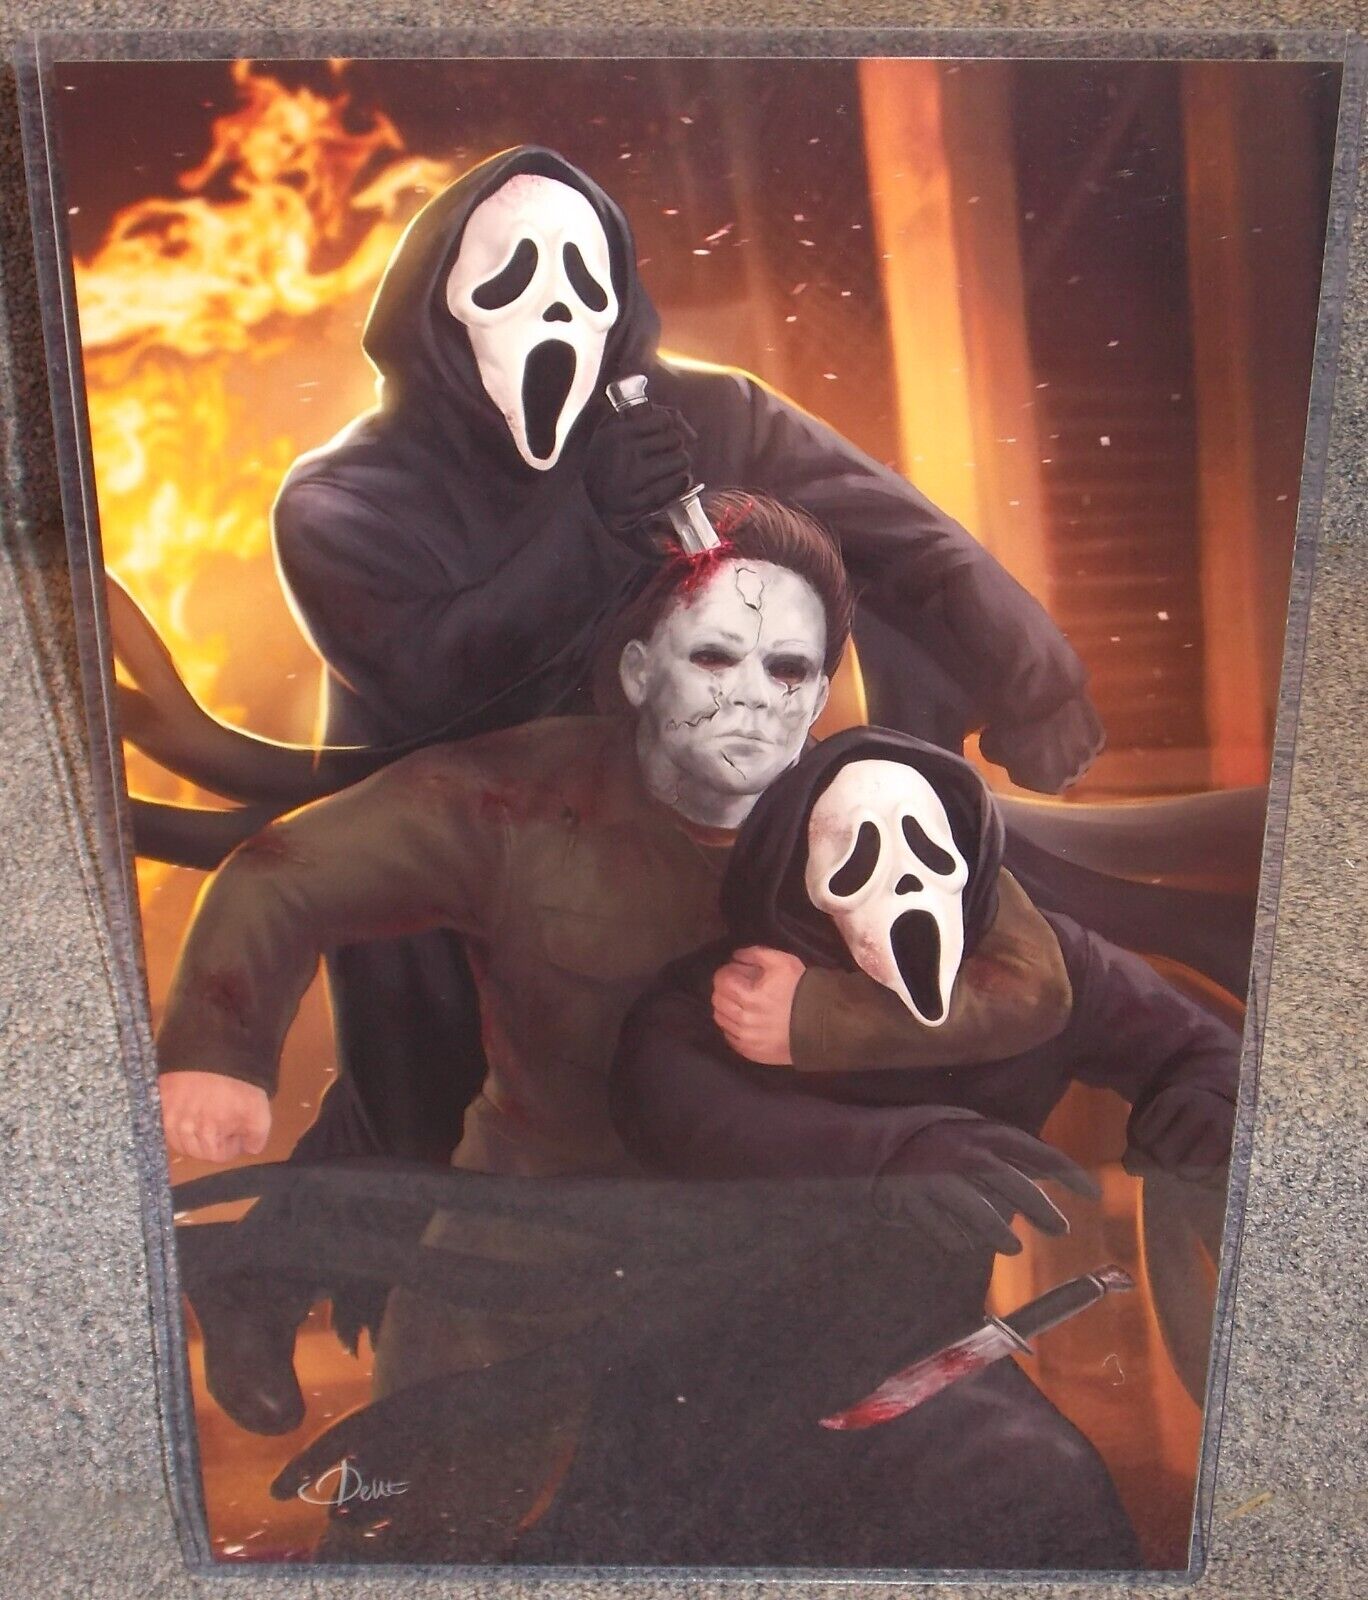 brian m reynolds recommends michael myers x ghostface pic